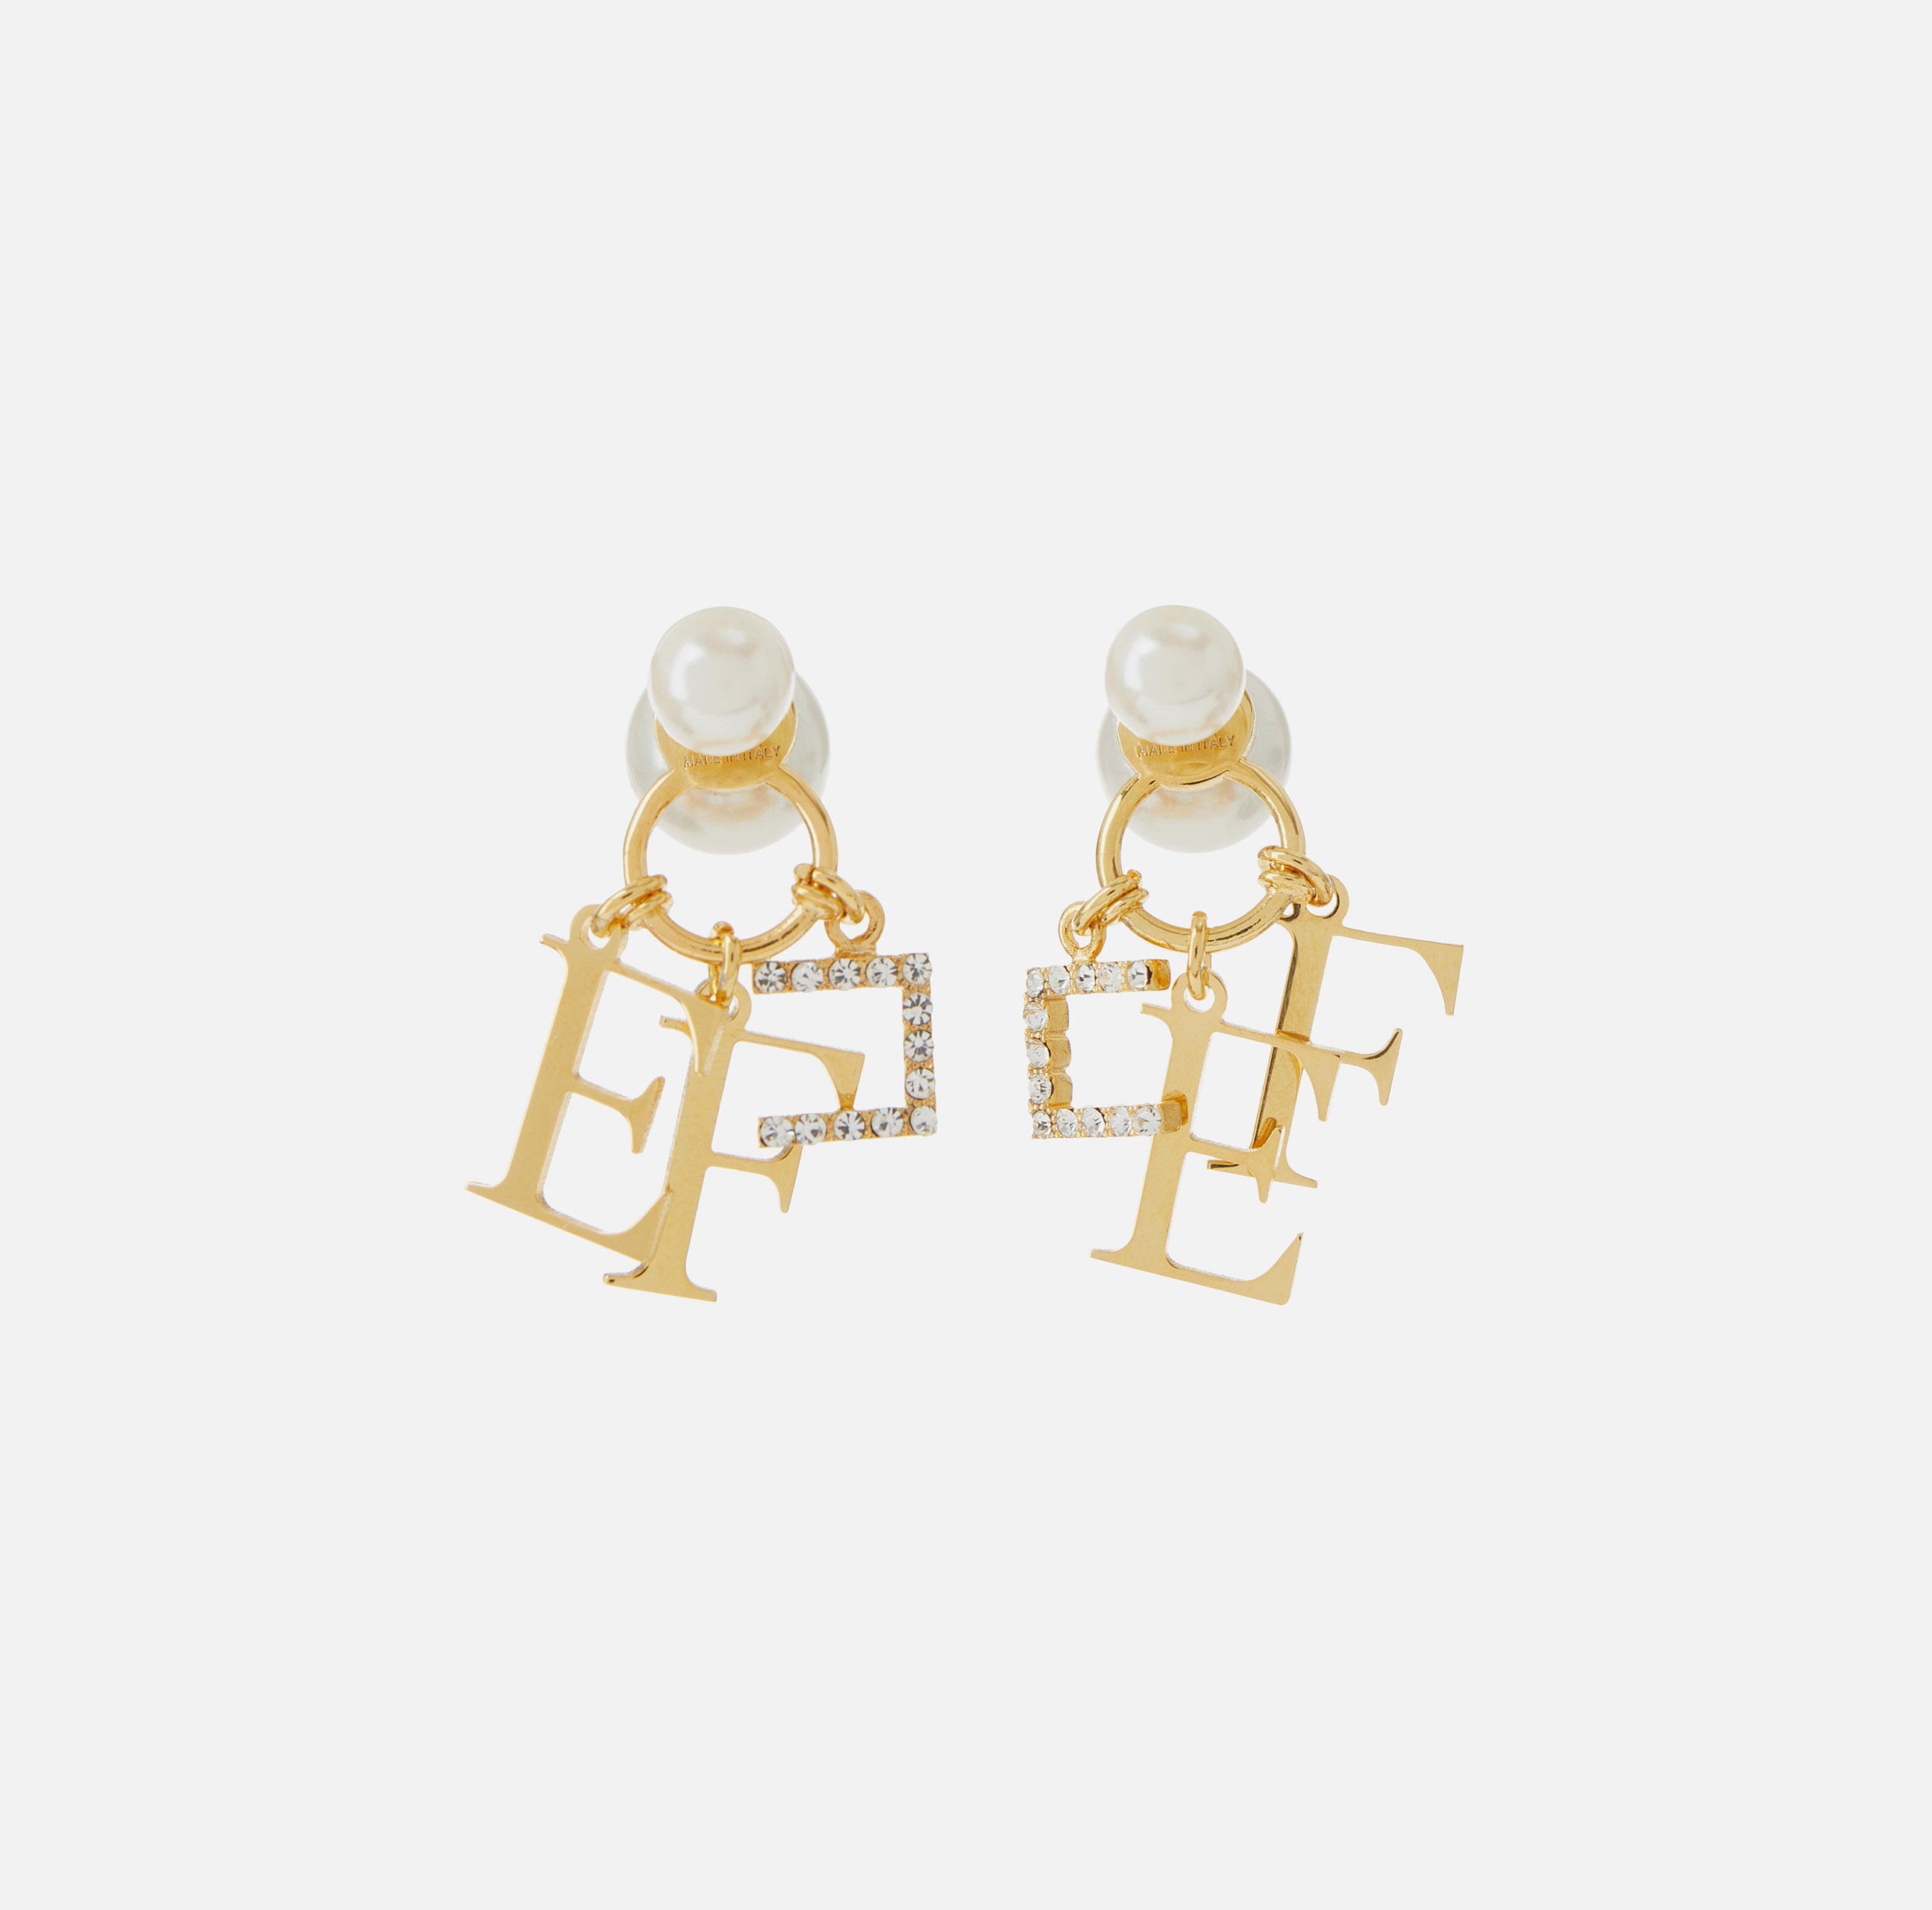 Earrings with pendants and pearls - ACCESSORI - Elisabetta Franchi